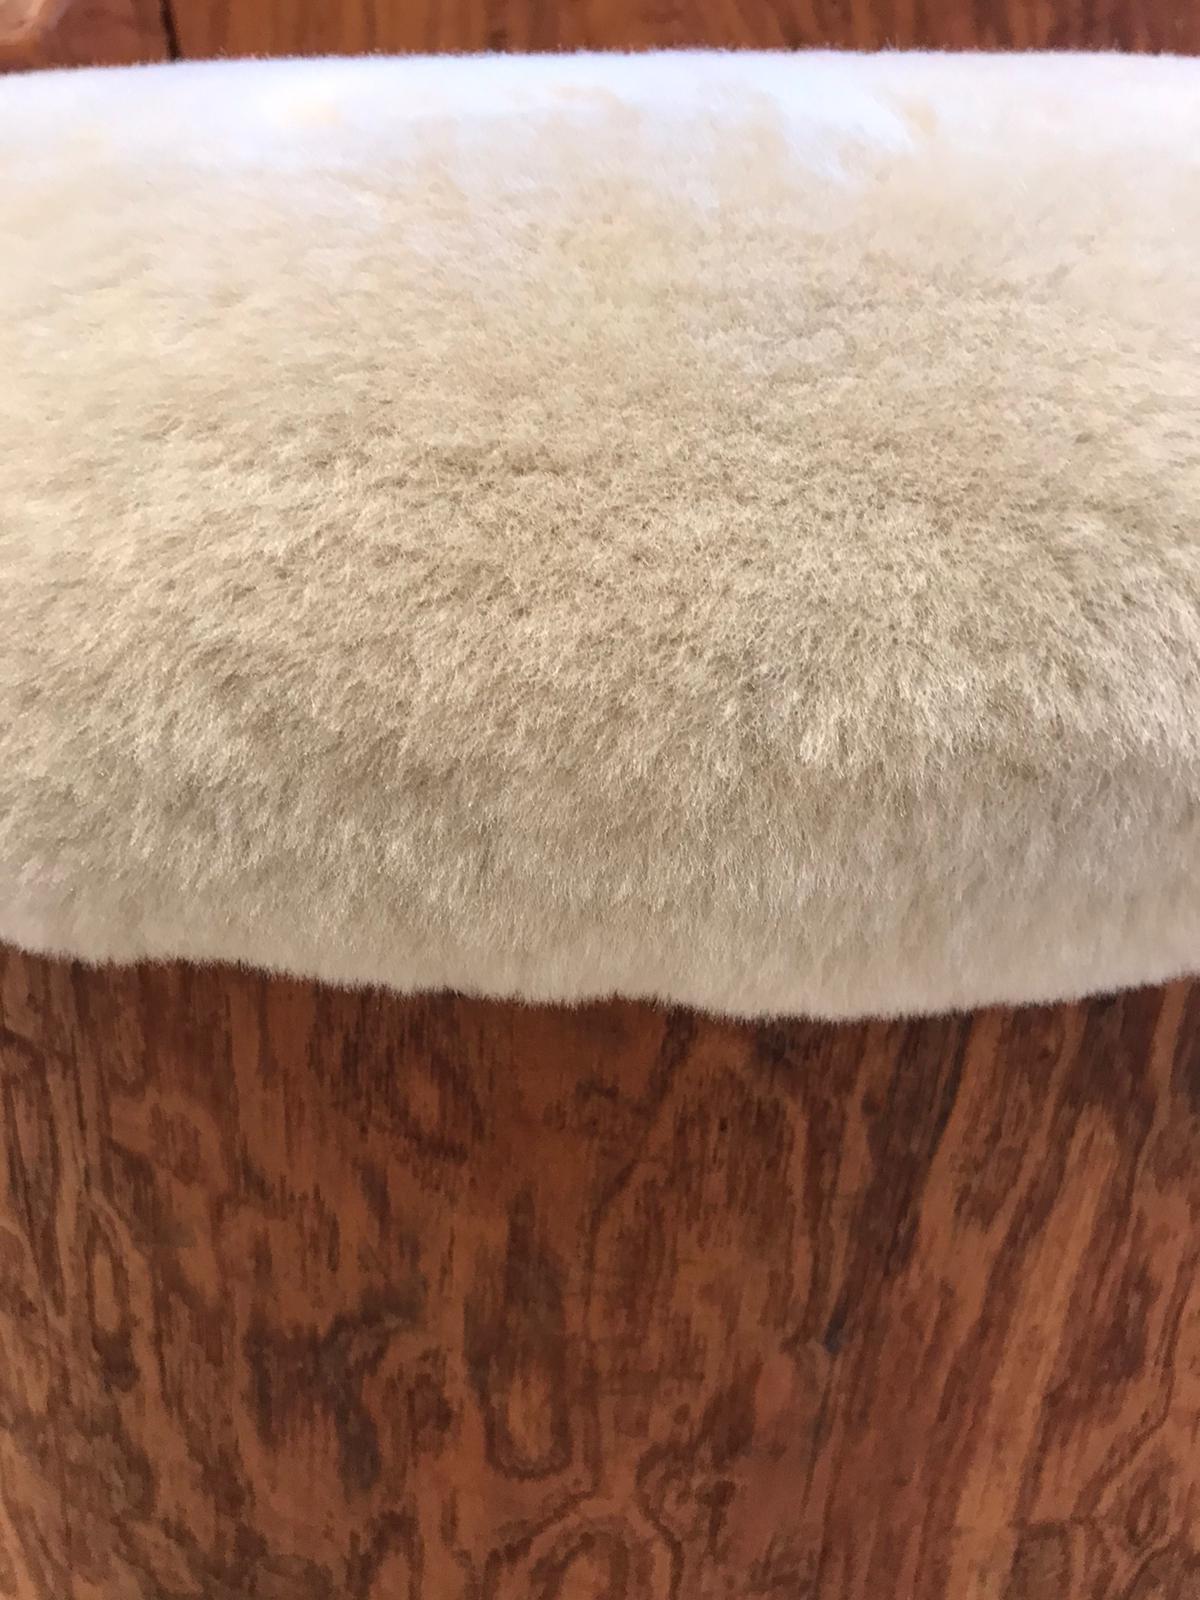 Wool Unique Wood Carved Trunk Chair with Shearling Seat